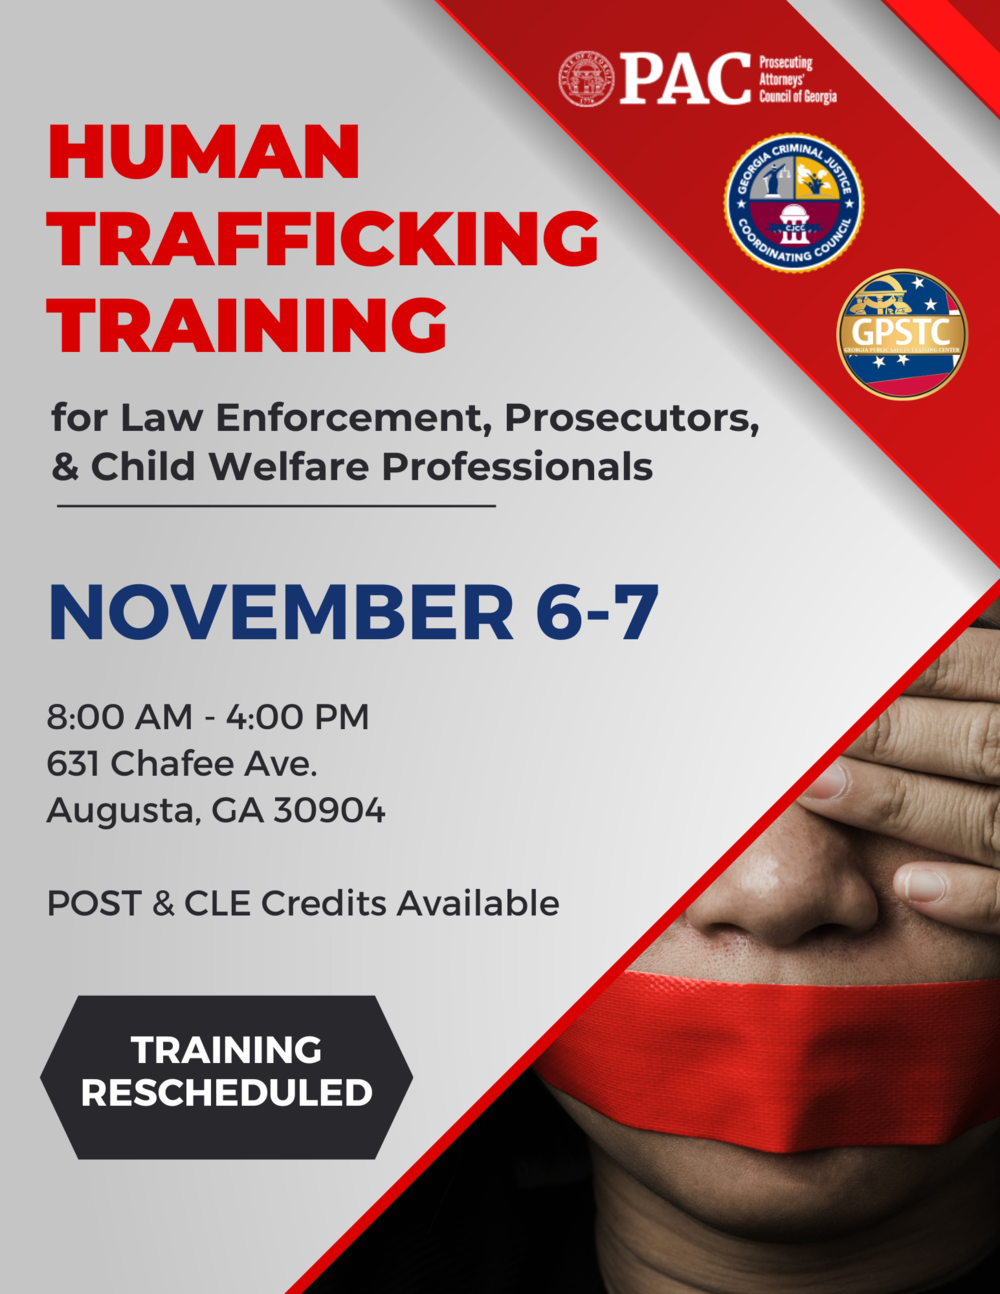 An image of the training flier features a person with their mouth taped shut and their eyes covered.